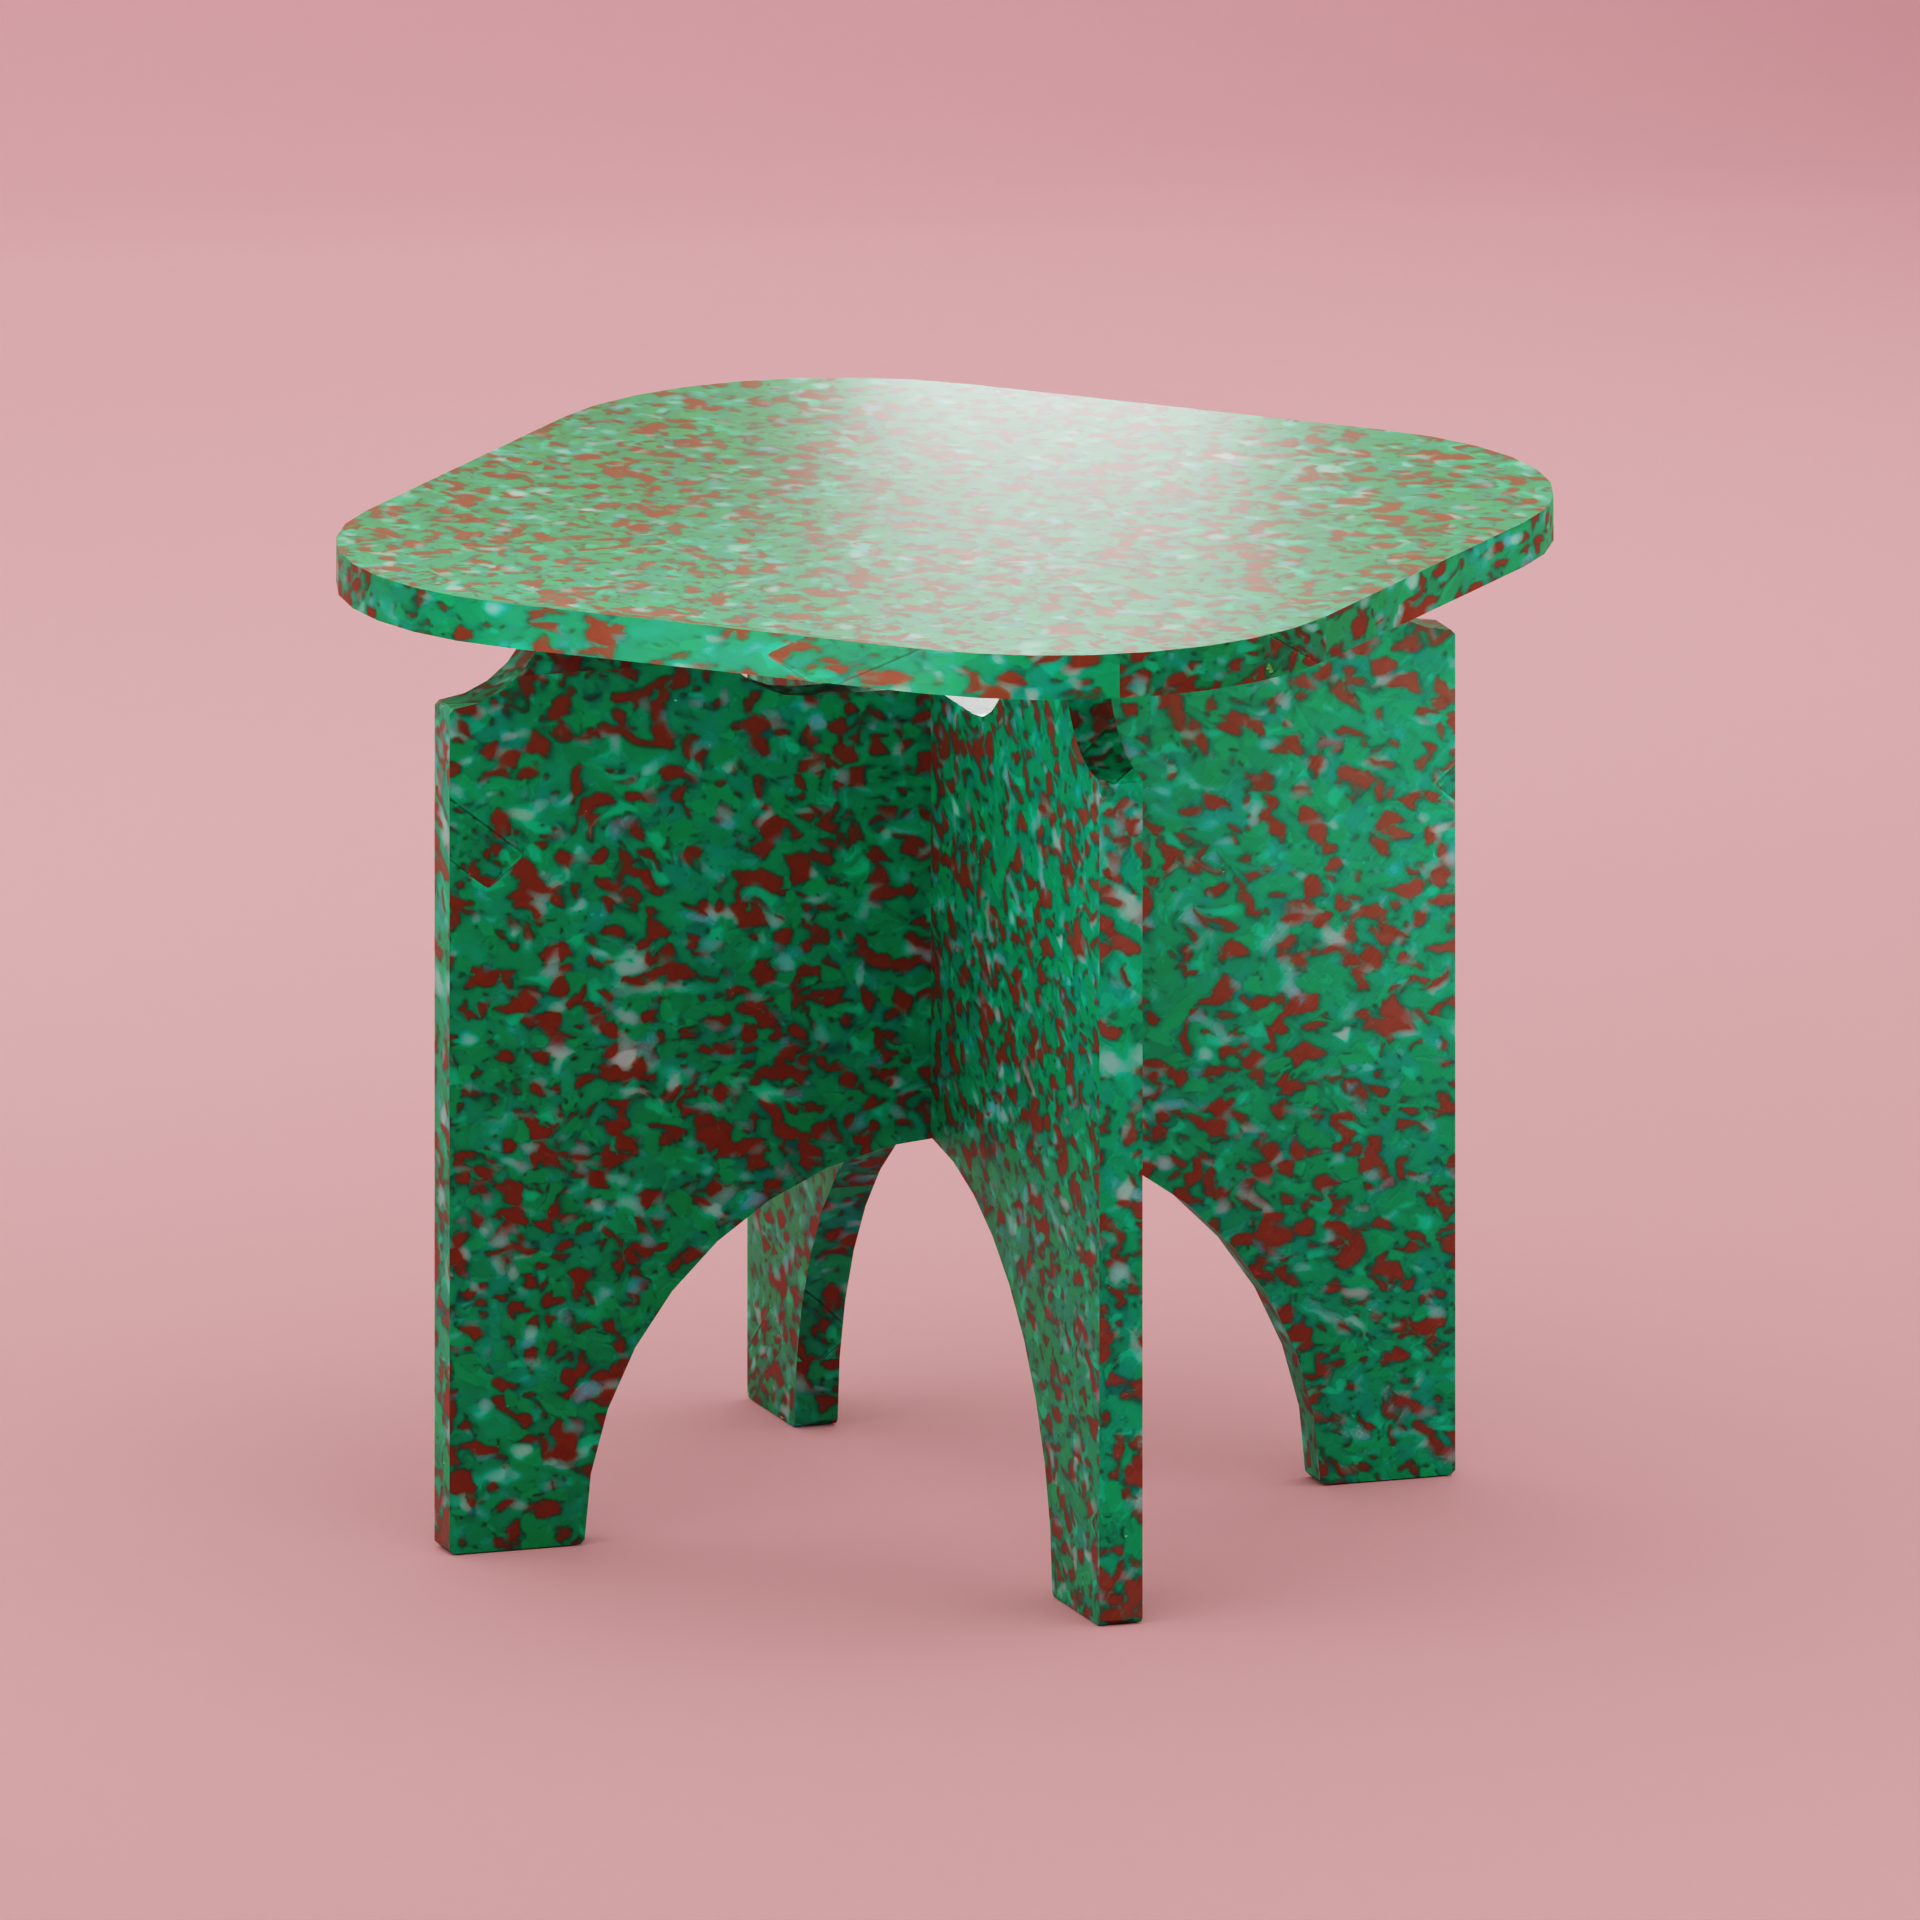 GREEN SQUARE TOP STOOL BY THE MINIMONO PROJECT - BRAND FOR ECO FRIENDLY - PLAYFUL - MULTI FUNCTIONAL - SUSTAINABLE - HIGH QUALITY - DESIGN FURNITURE FROM RECYCLED PLASTIC FOR BOTH ADULT AND CHILDREN MADE IN BERLIN GERMANY